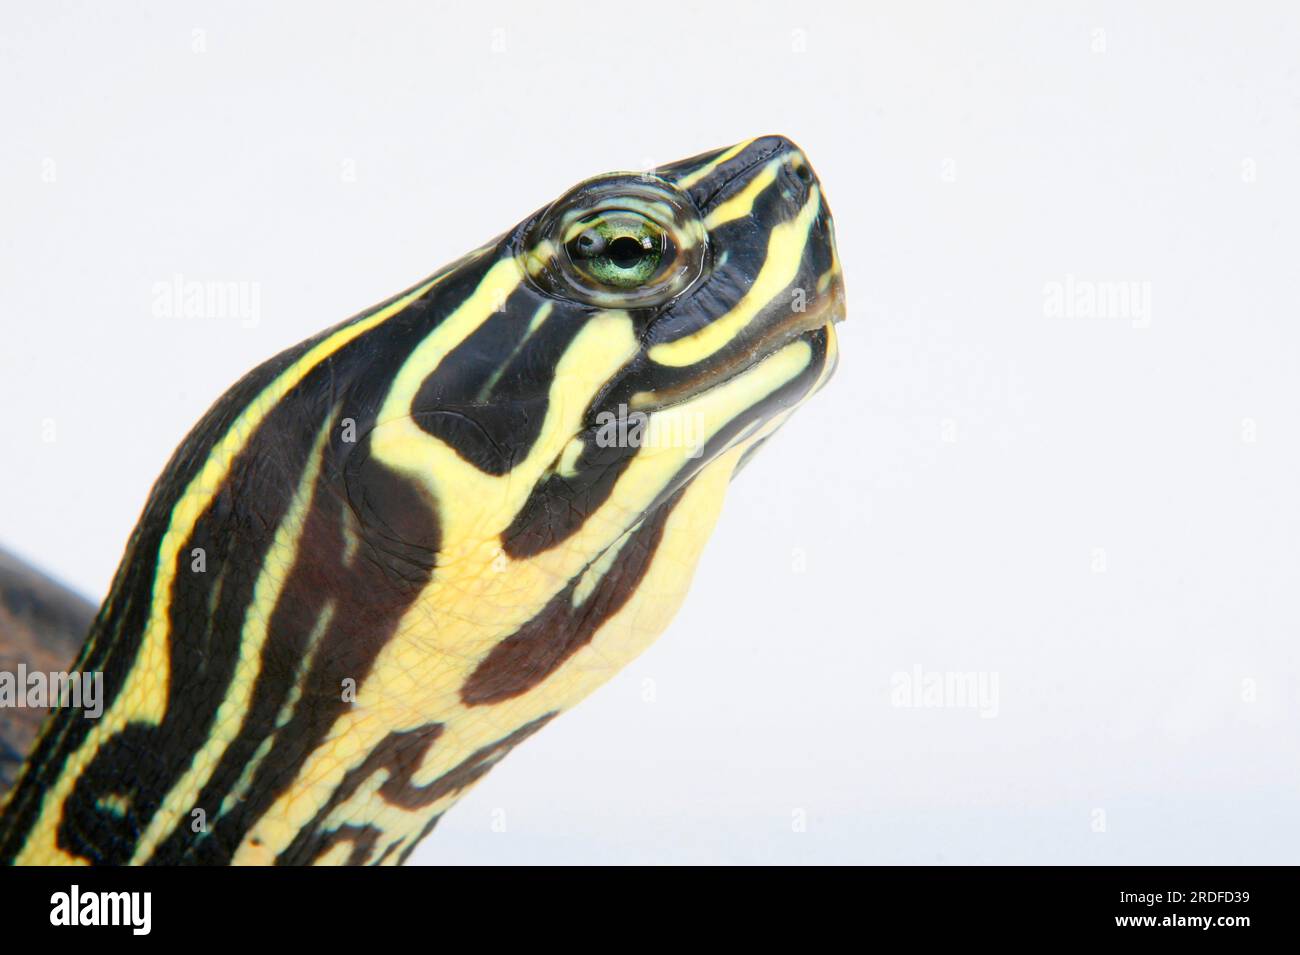 Florida Redbelly Turtle (Chrysemys nelsoni) (Pseudemys rubriventris nelsoni), Red-bellied Turtle Stock Photo